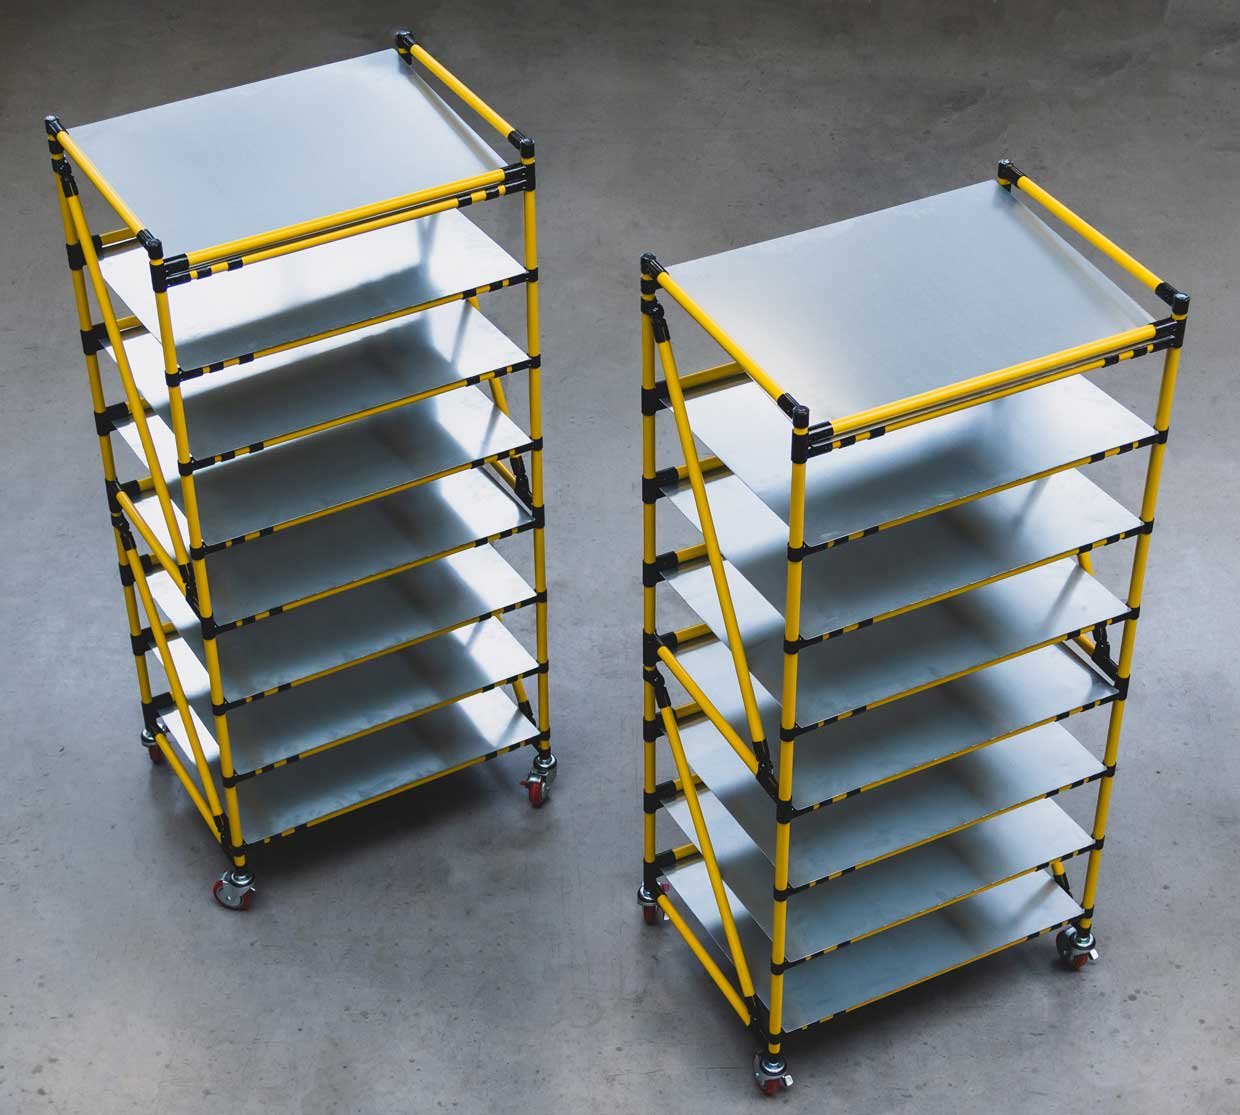 Shelving made of yellow steel tubes with eight levels 